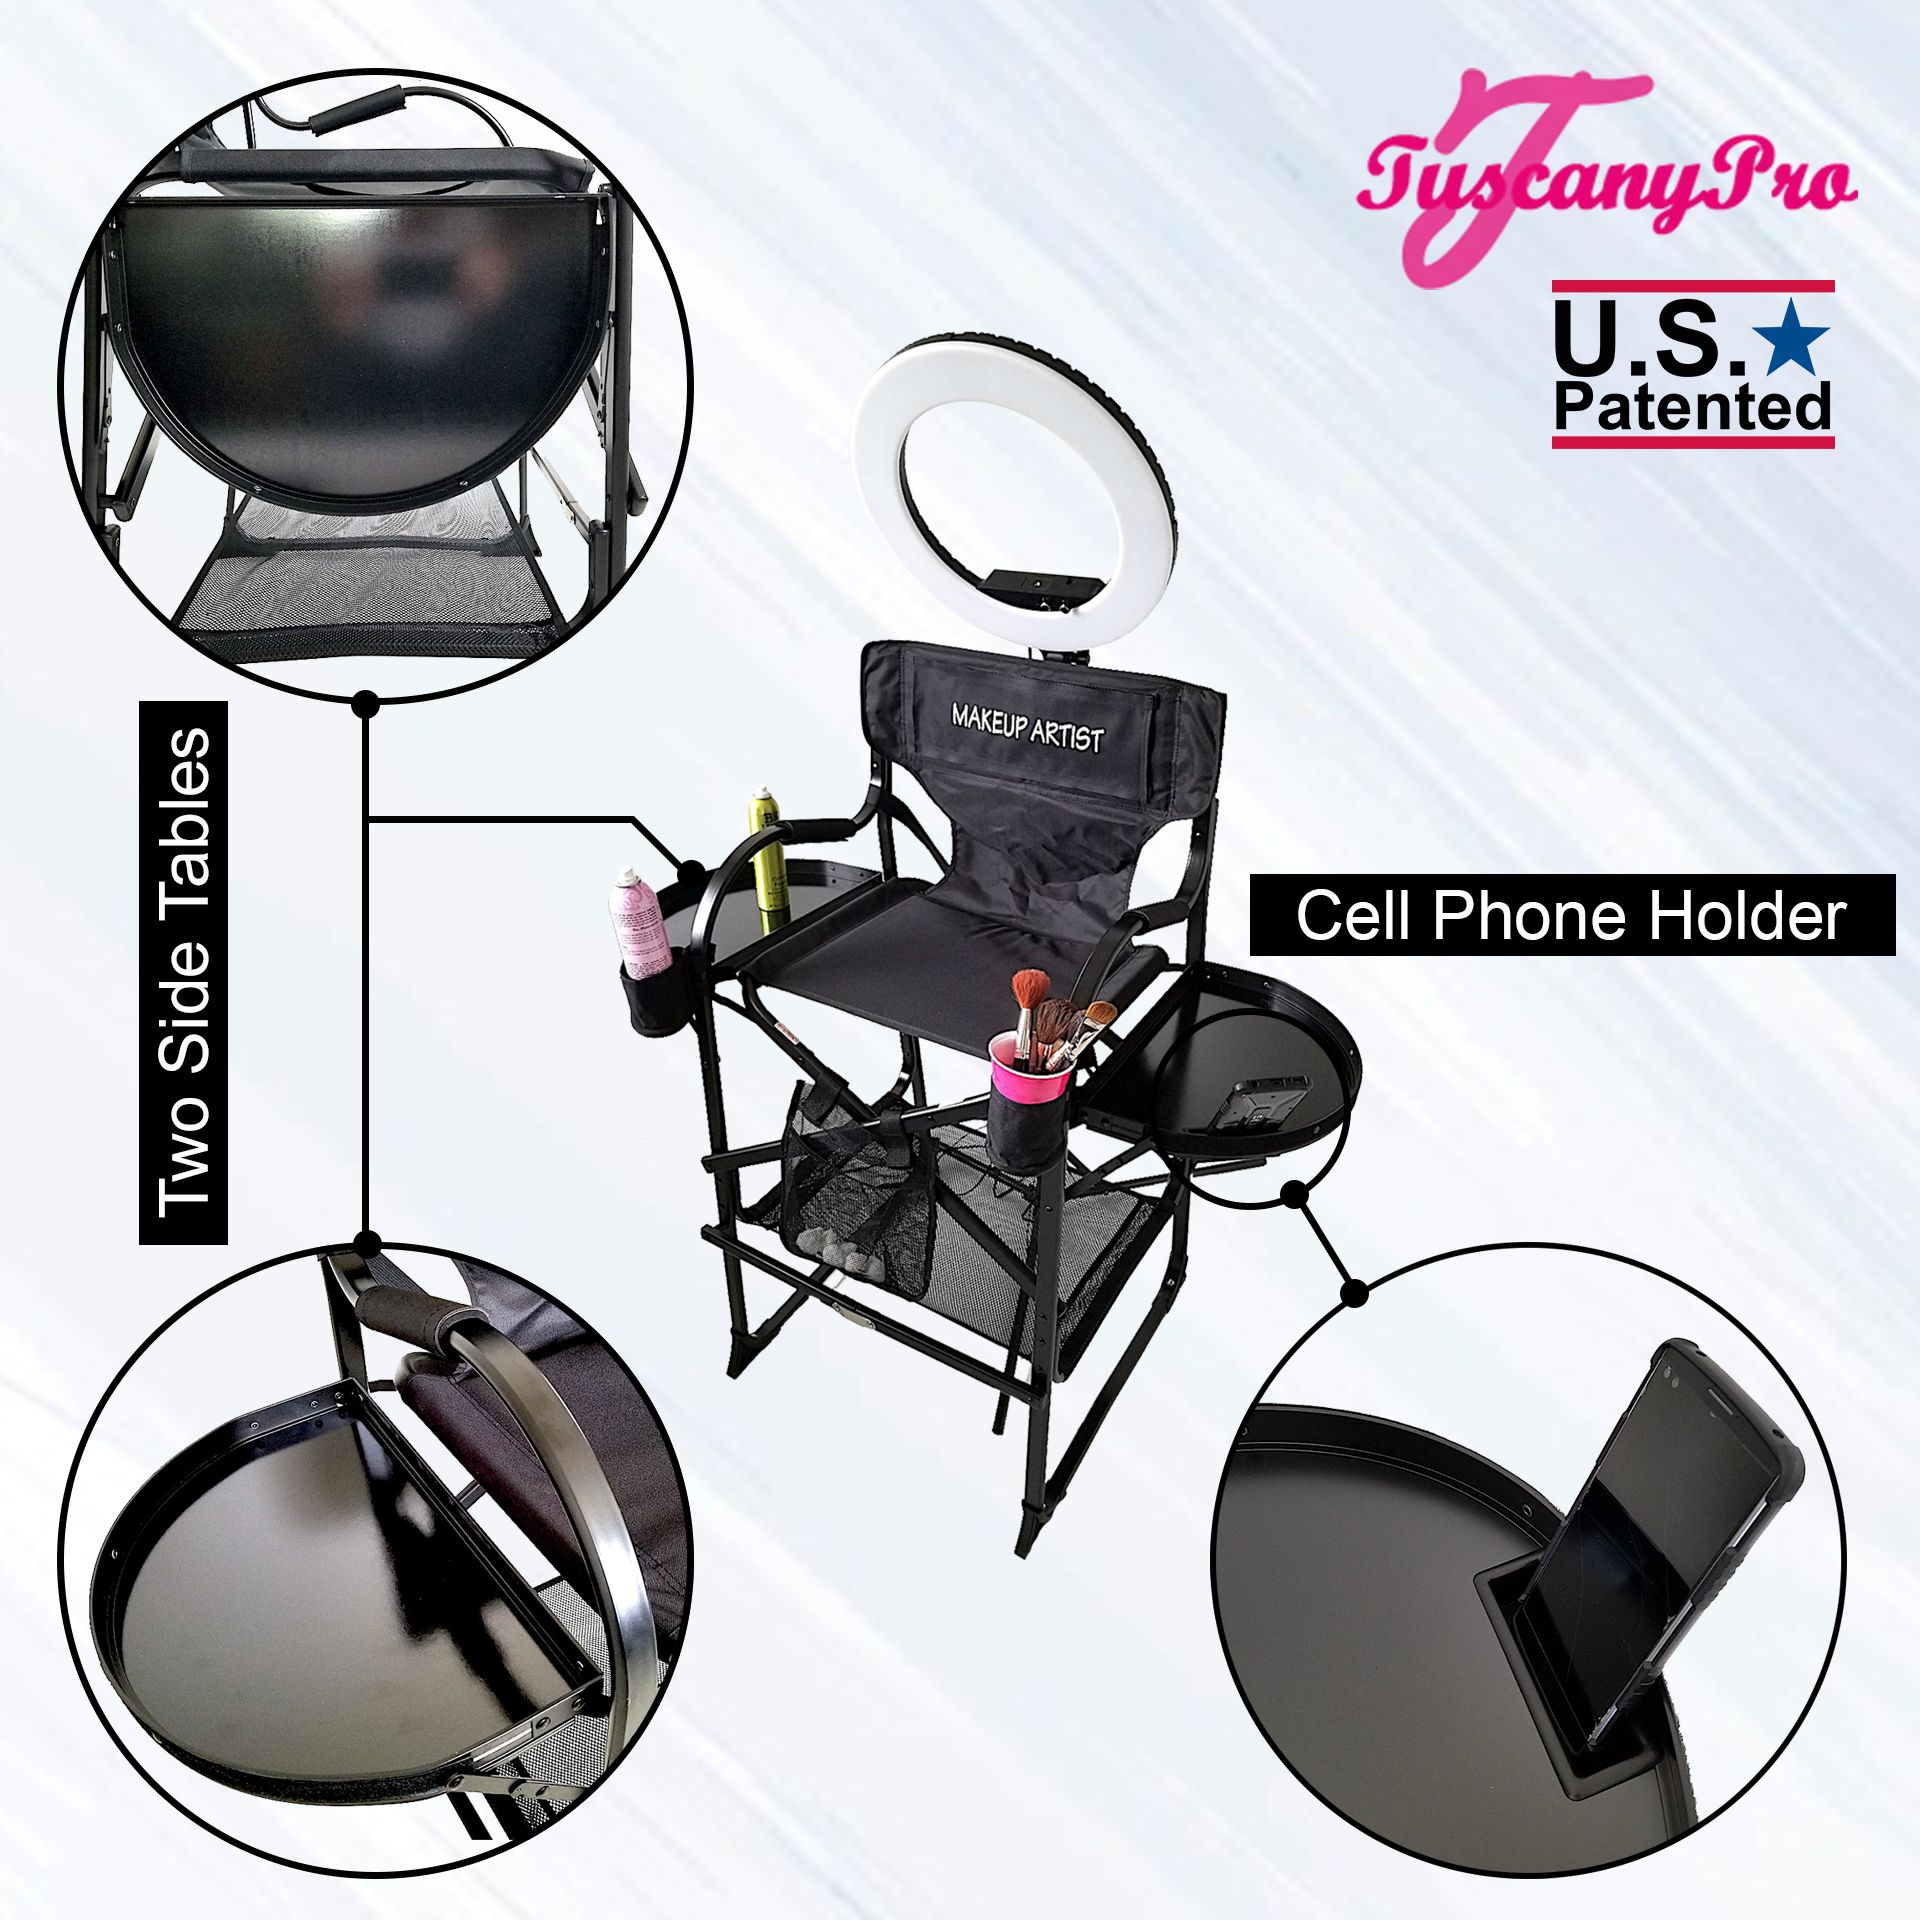 Tuscanypro Classic Makeup and Hair Chair - LED Light Package